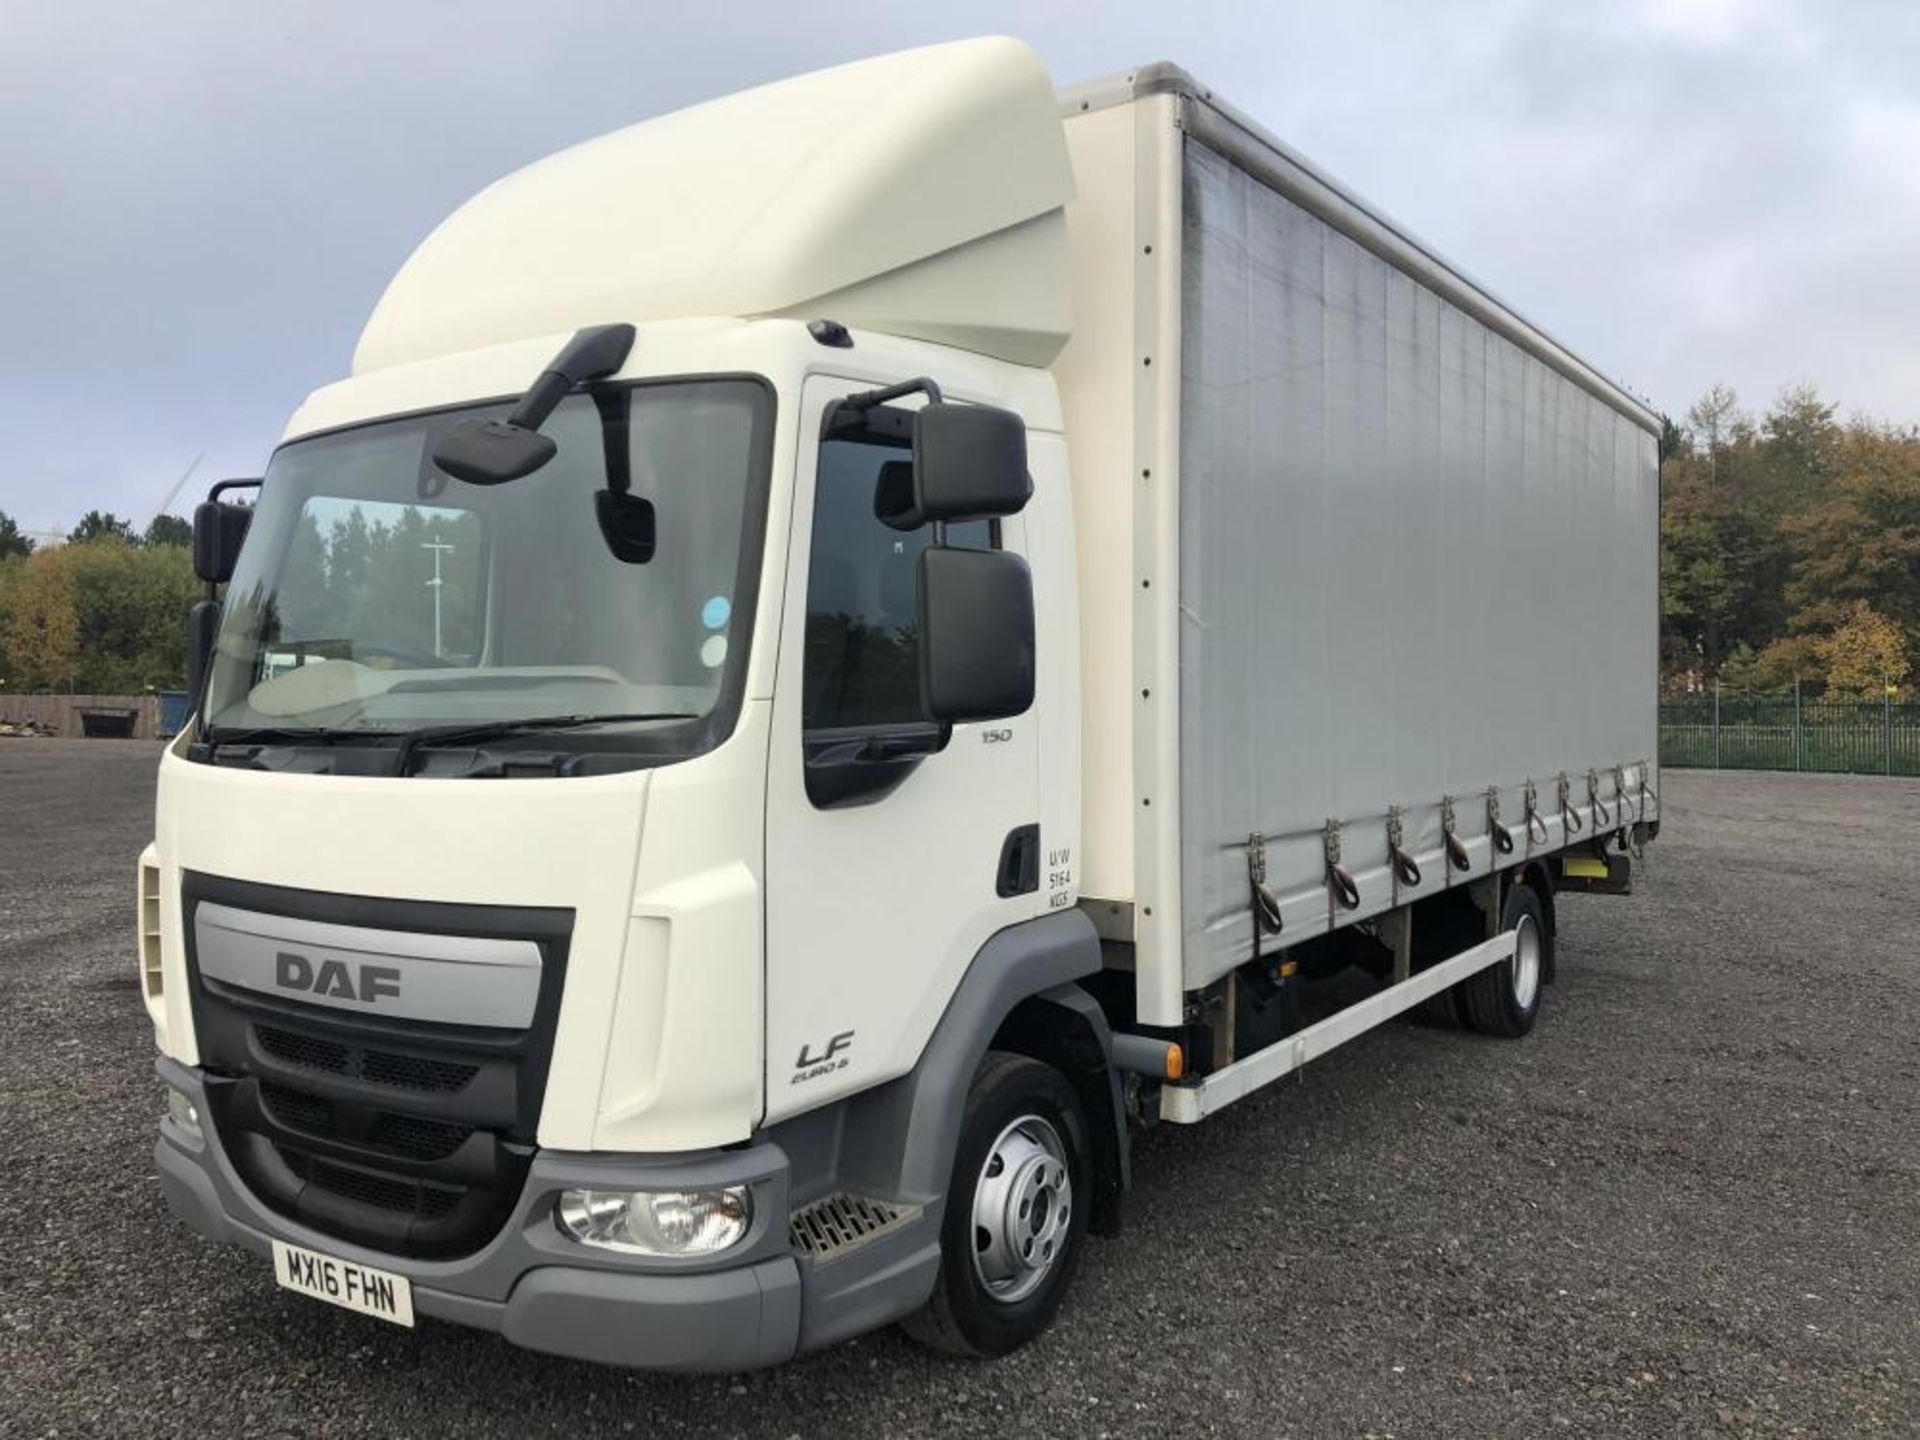 2016 Daf lf 45.150 7.5 Ton Curtain Side Truck with Under Floor Tail Lift *PLUS VAT* - Image 3 of 12